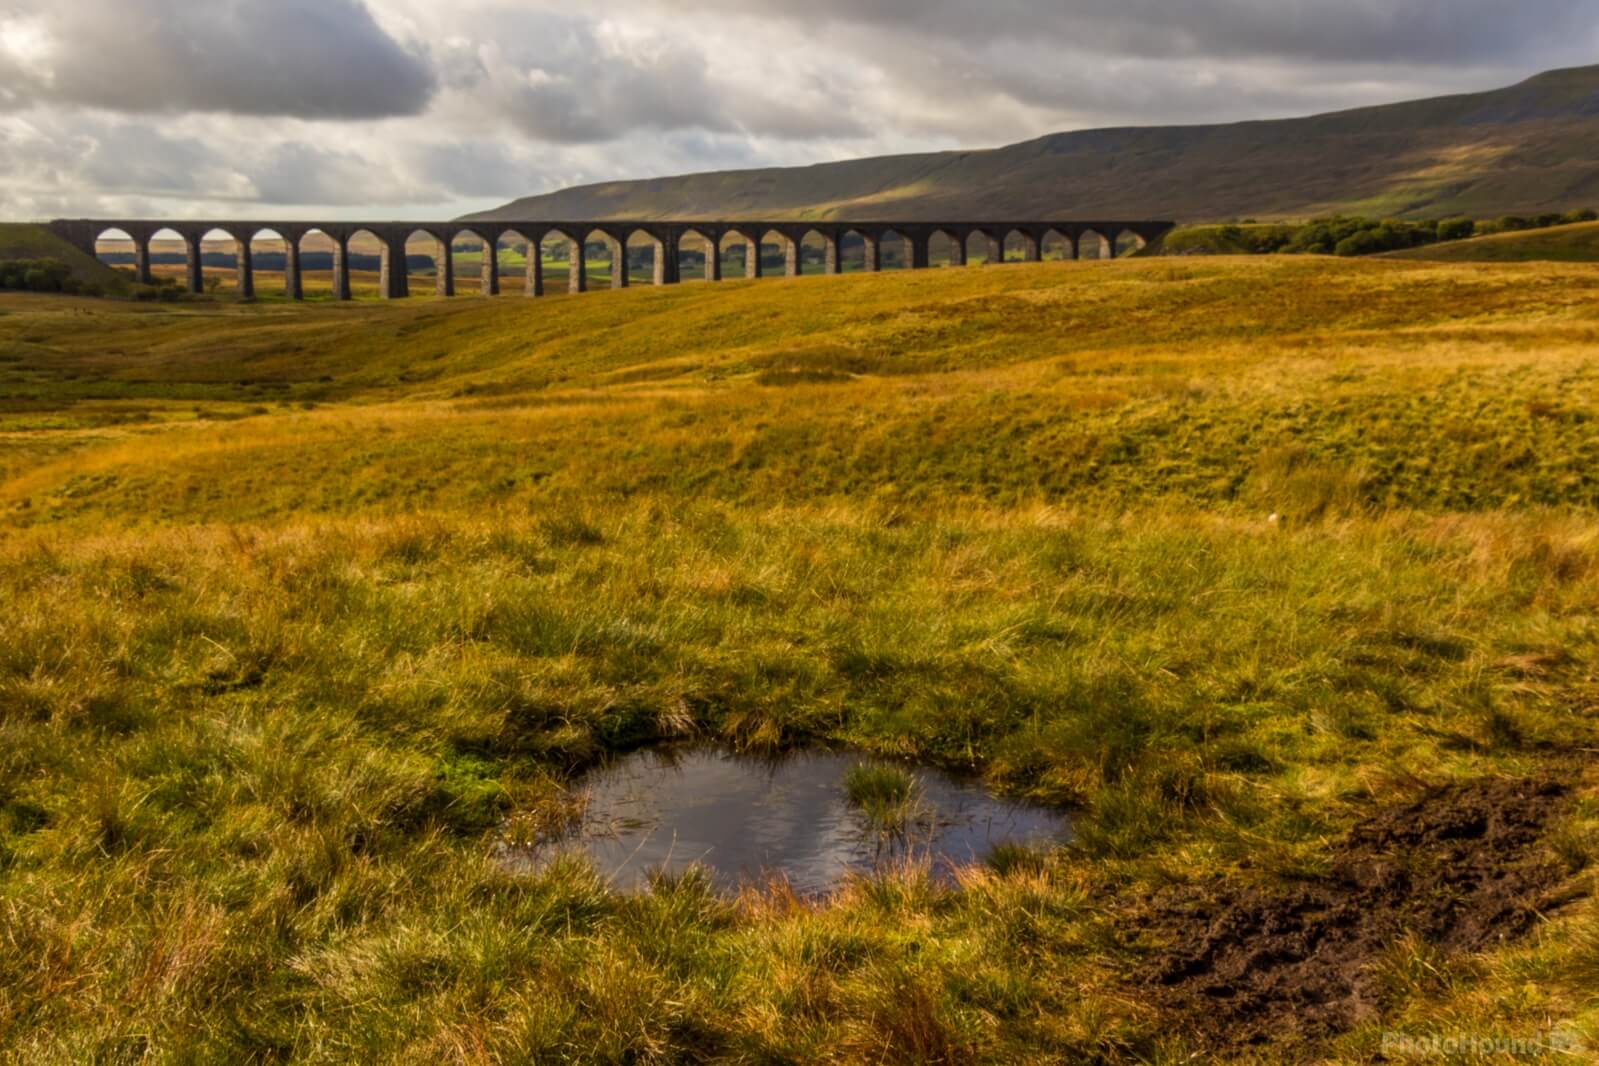 Image of Ribblehead Viaduct, Ribblesdale by Andy Killingbeck